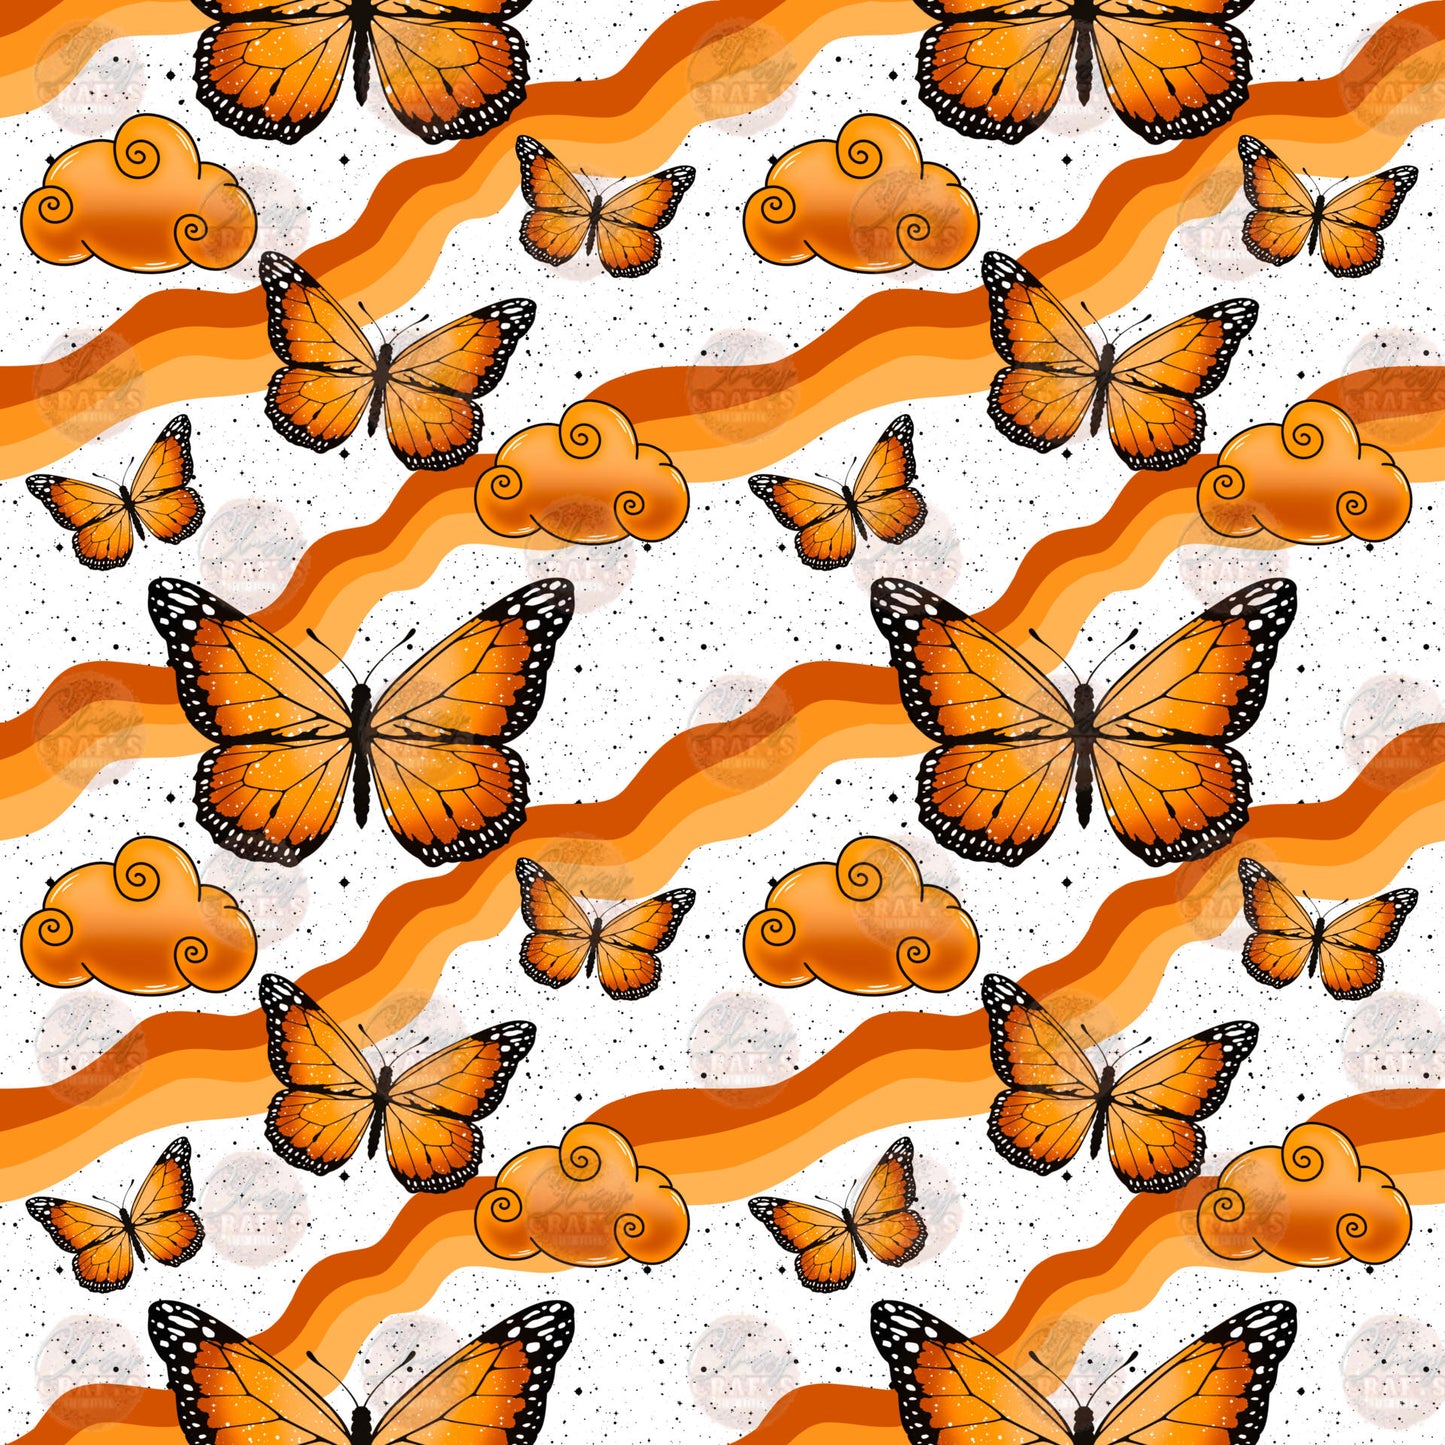 Butterfly Waves 1 Seamless Wrap - Sublimation Transfer